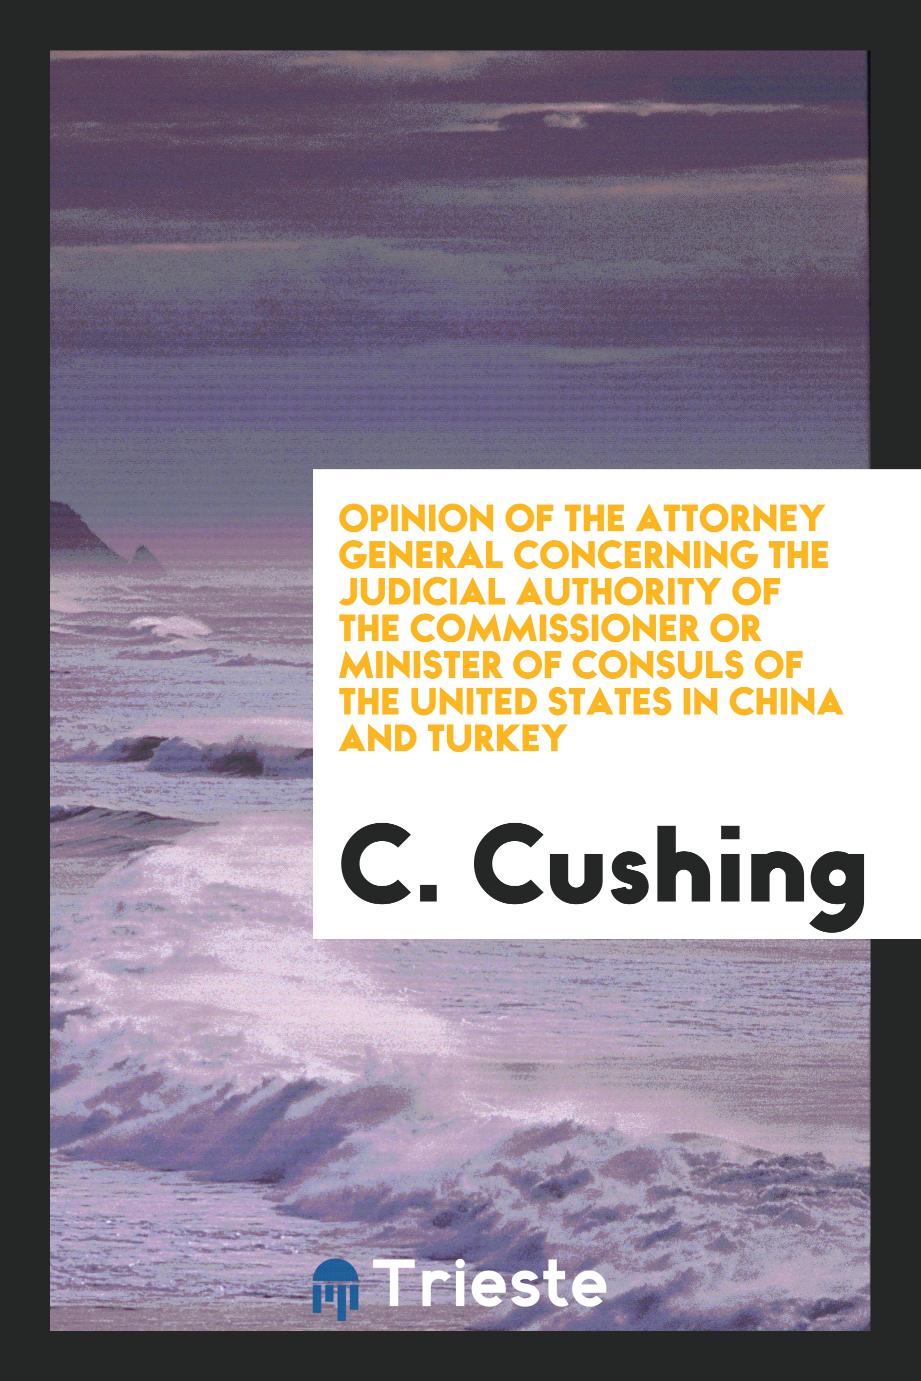 Opinion of the Attorney general concerning the judicial authority of the commissioner or minister of consuls of the United States in China and Turkey